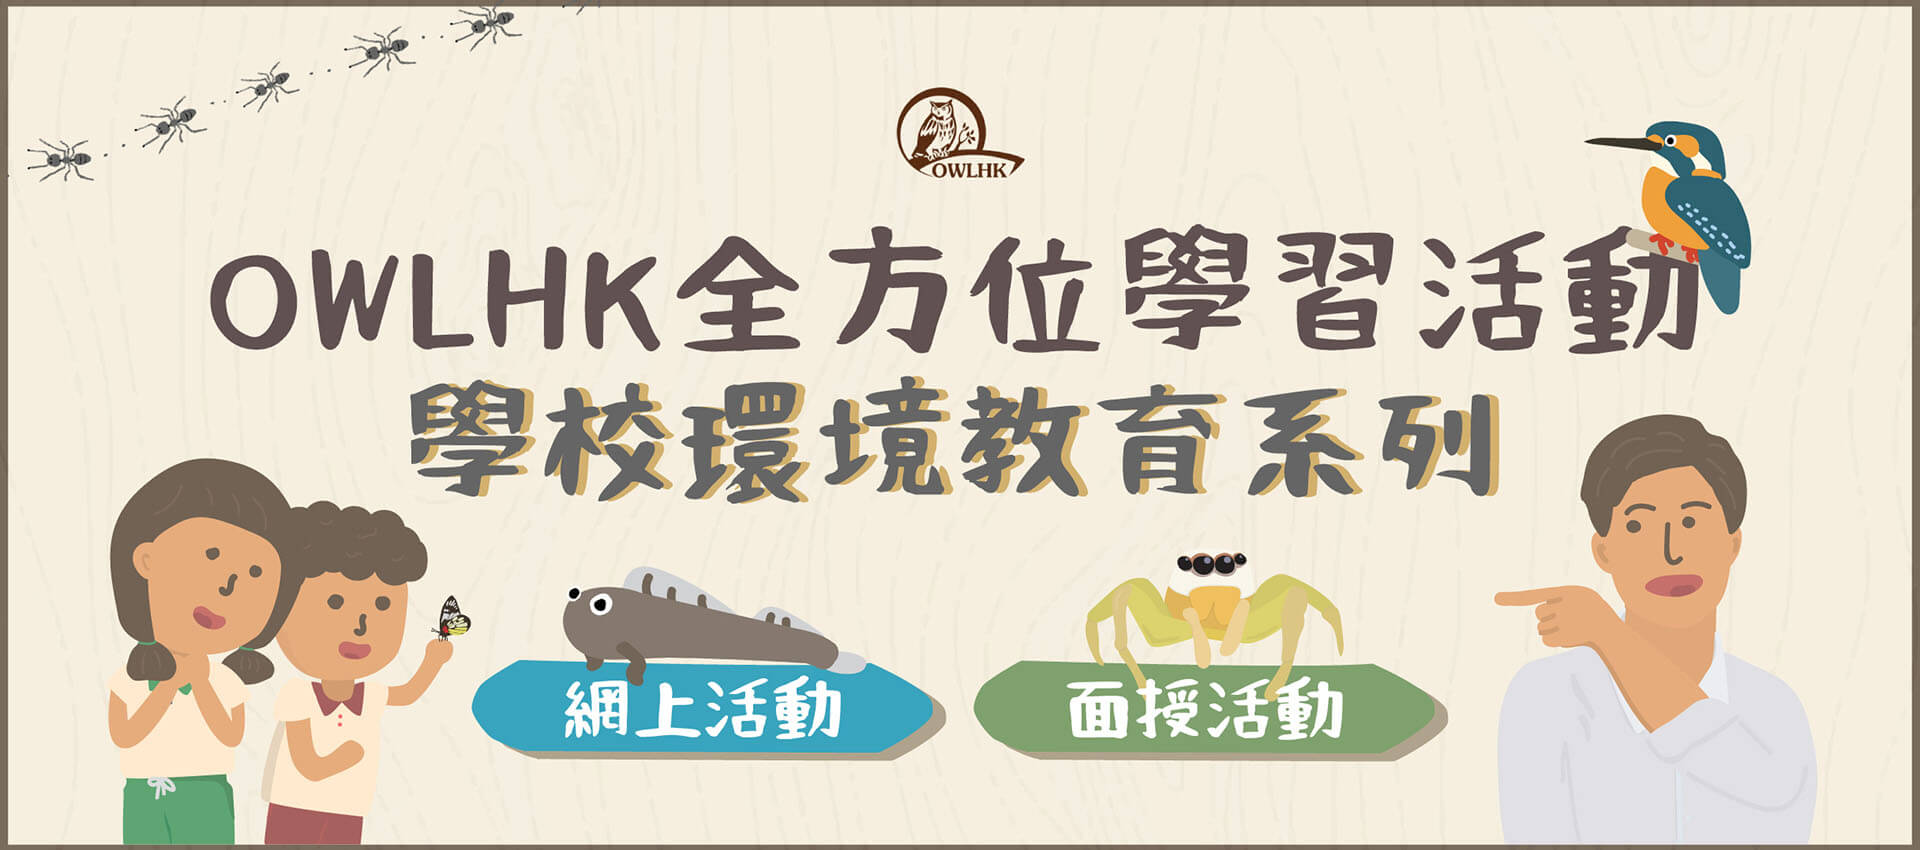 OWLHK Life-wide Learning Activities : Environmental Education for Schools